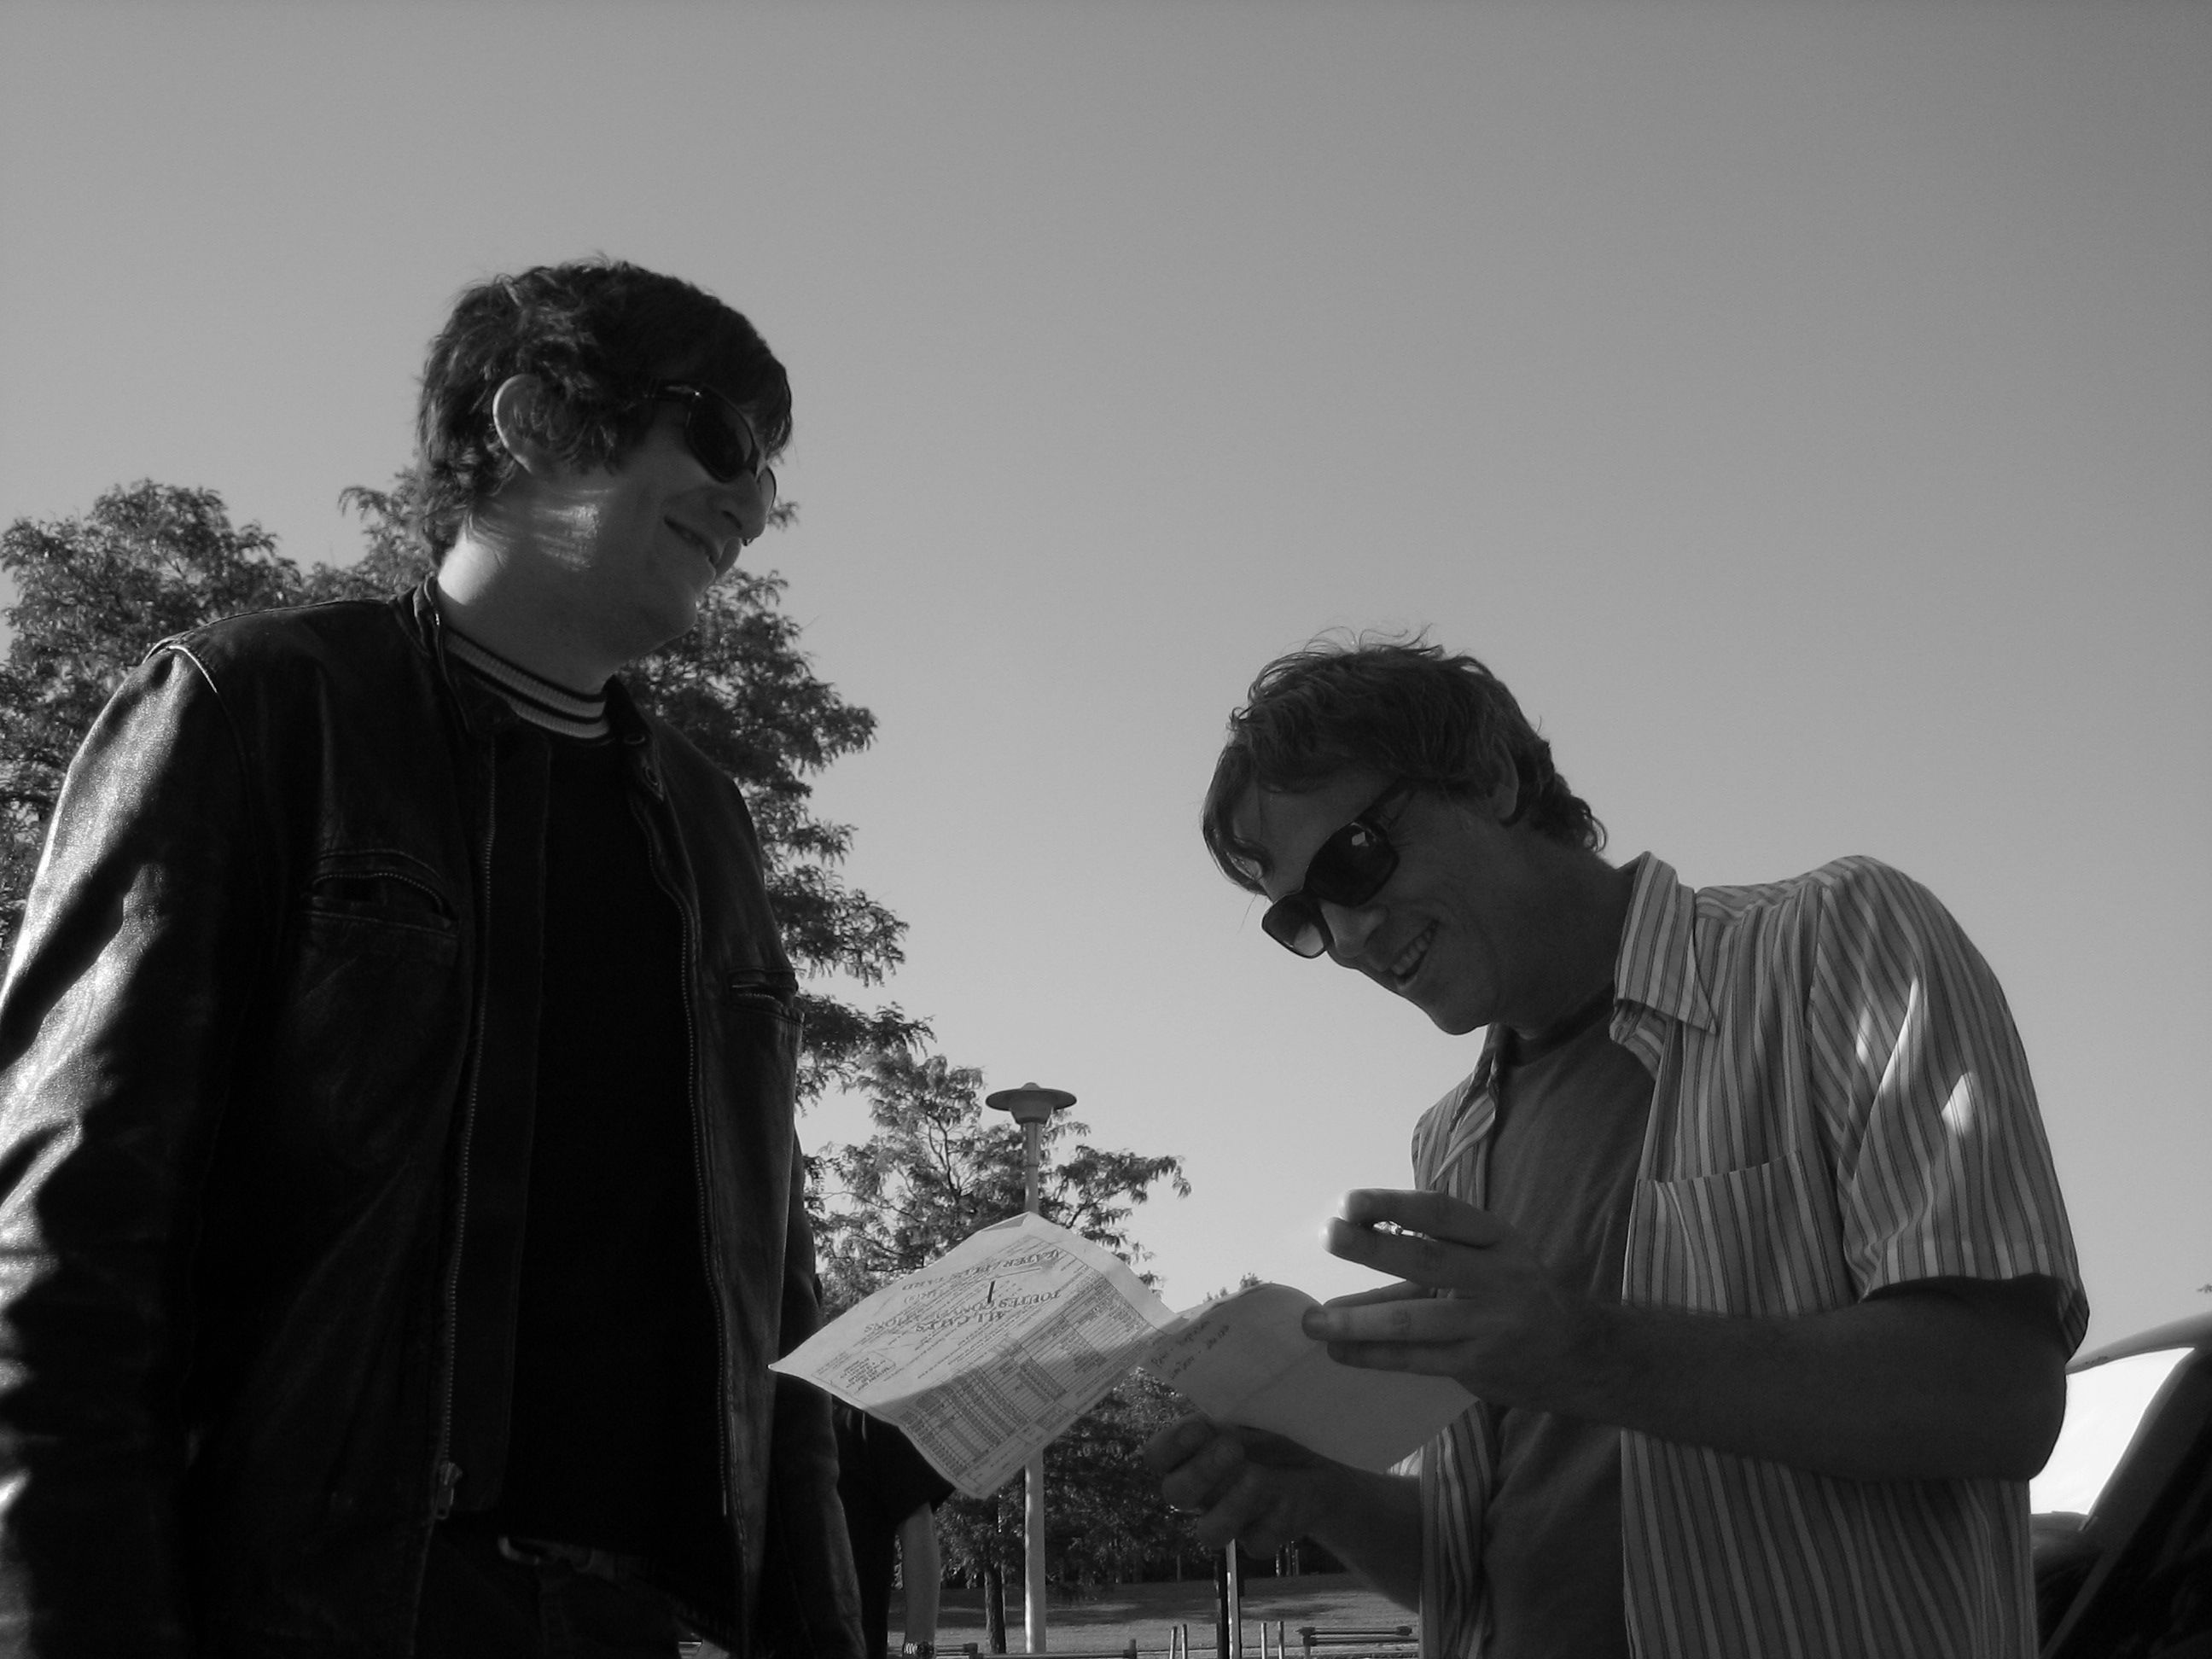 Joe Cobden and Todd Haynes on the set of I'm Not There